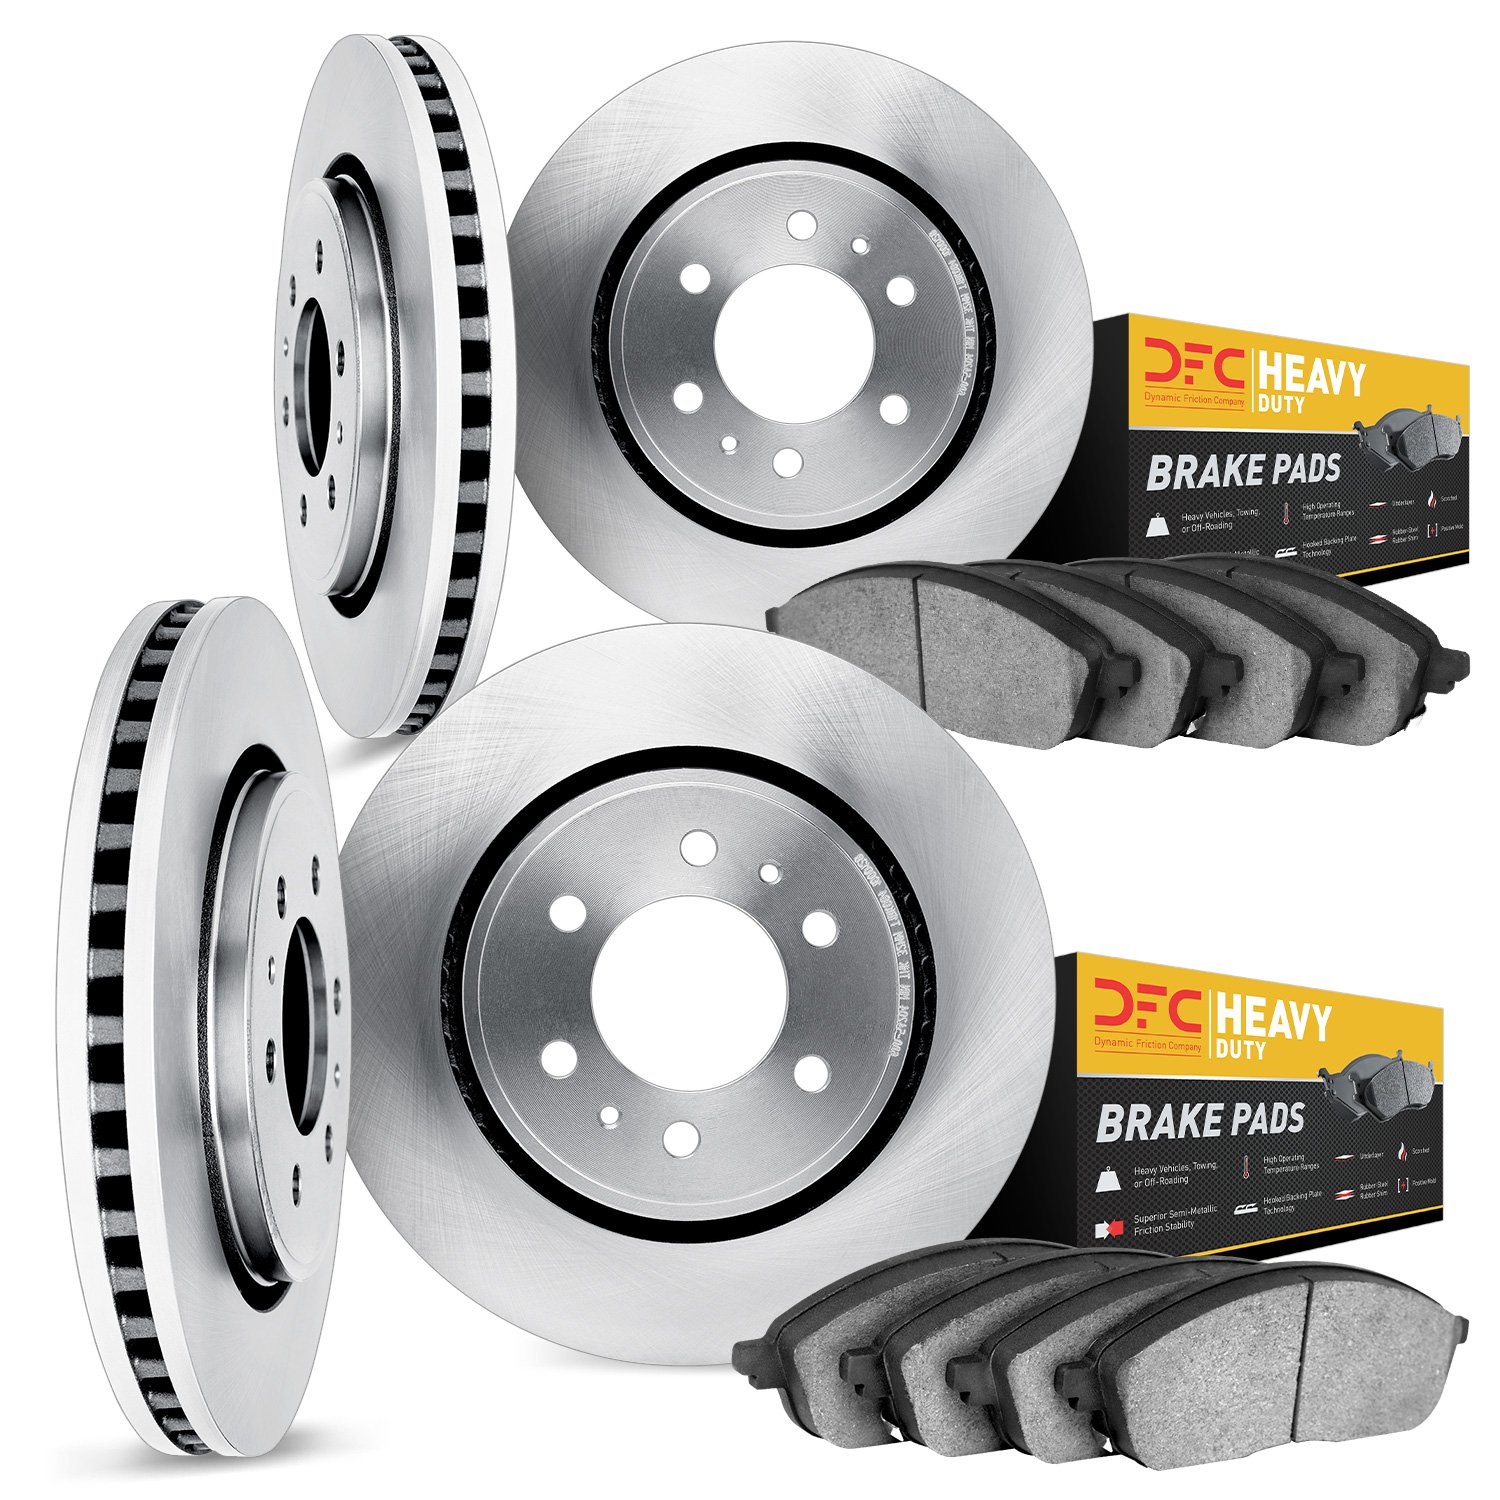 6204-40655 Brake Rotors w/Heavy-Duty Brake Pads Kit, Fits Select Multiple Makes/Models, Position: Front and Rear